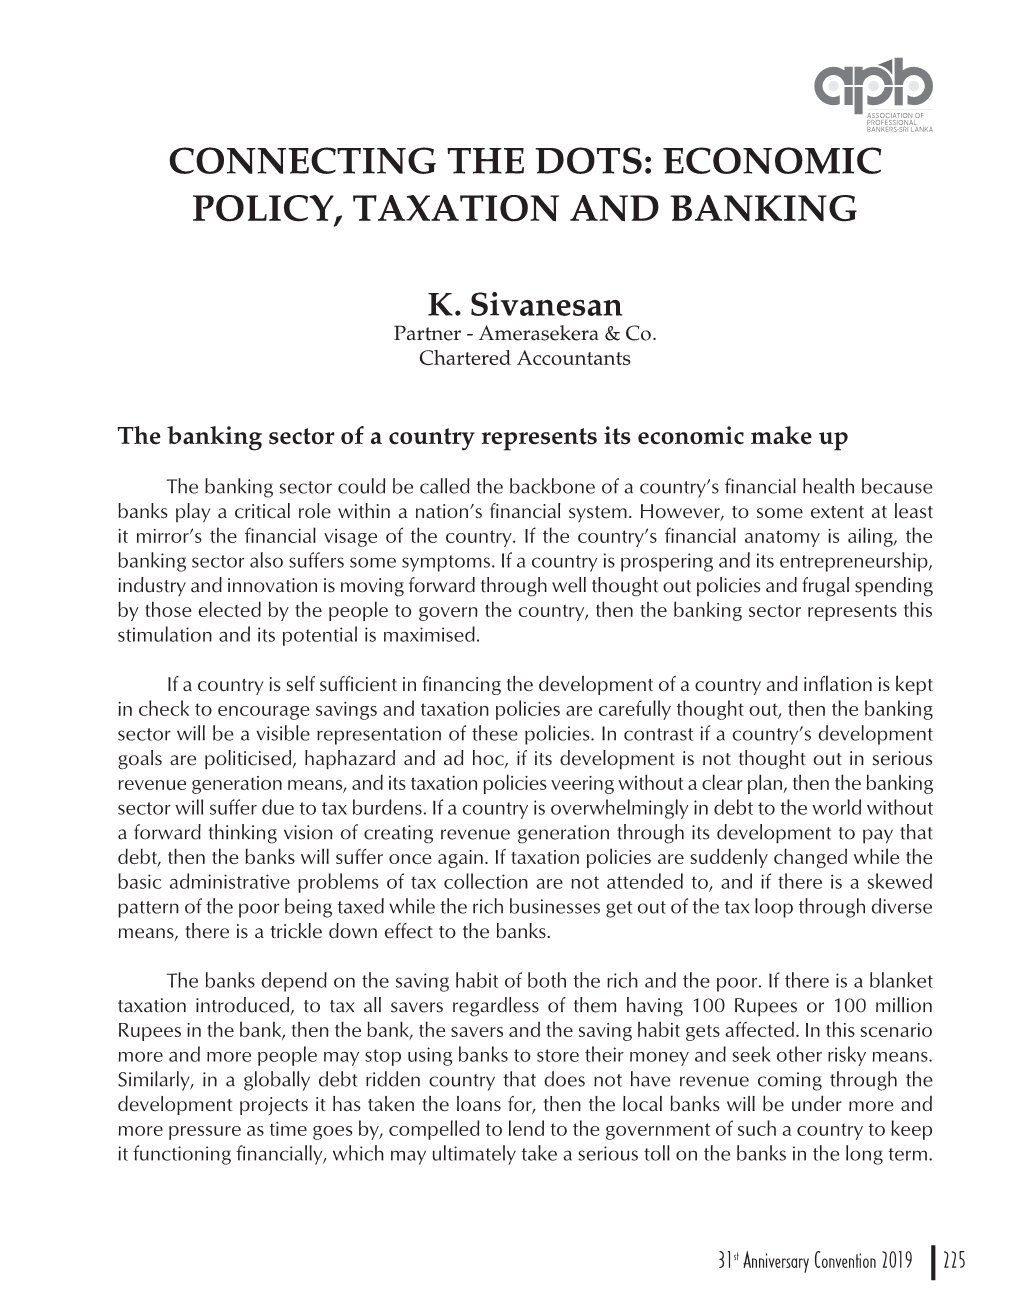 Economic Policy, Taxation and Banking